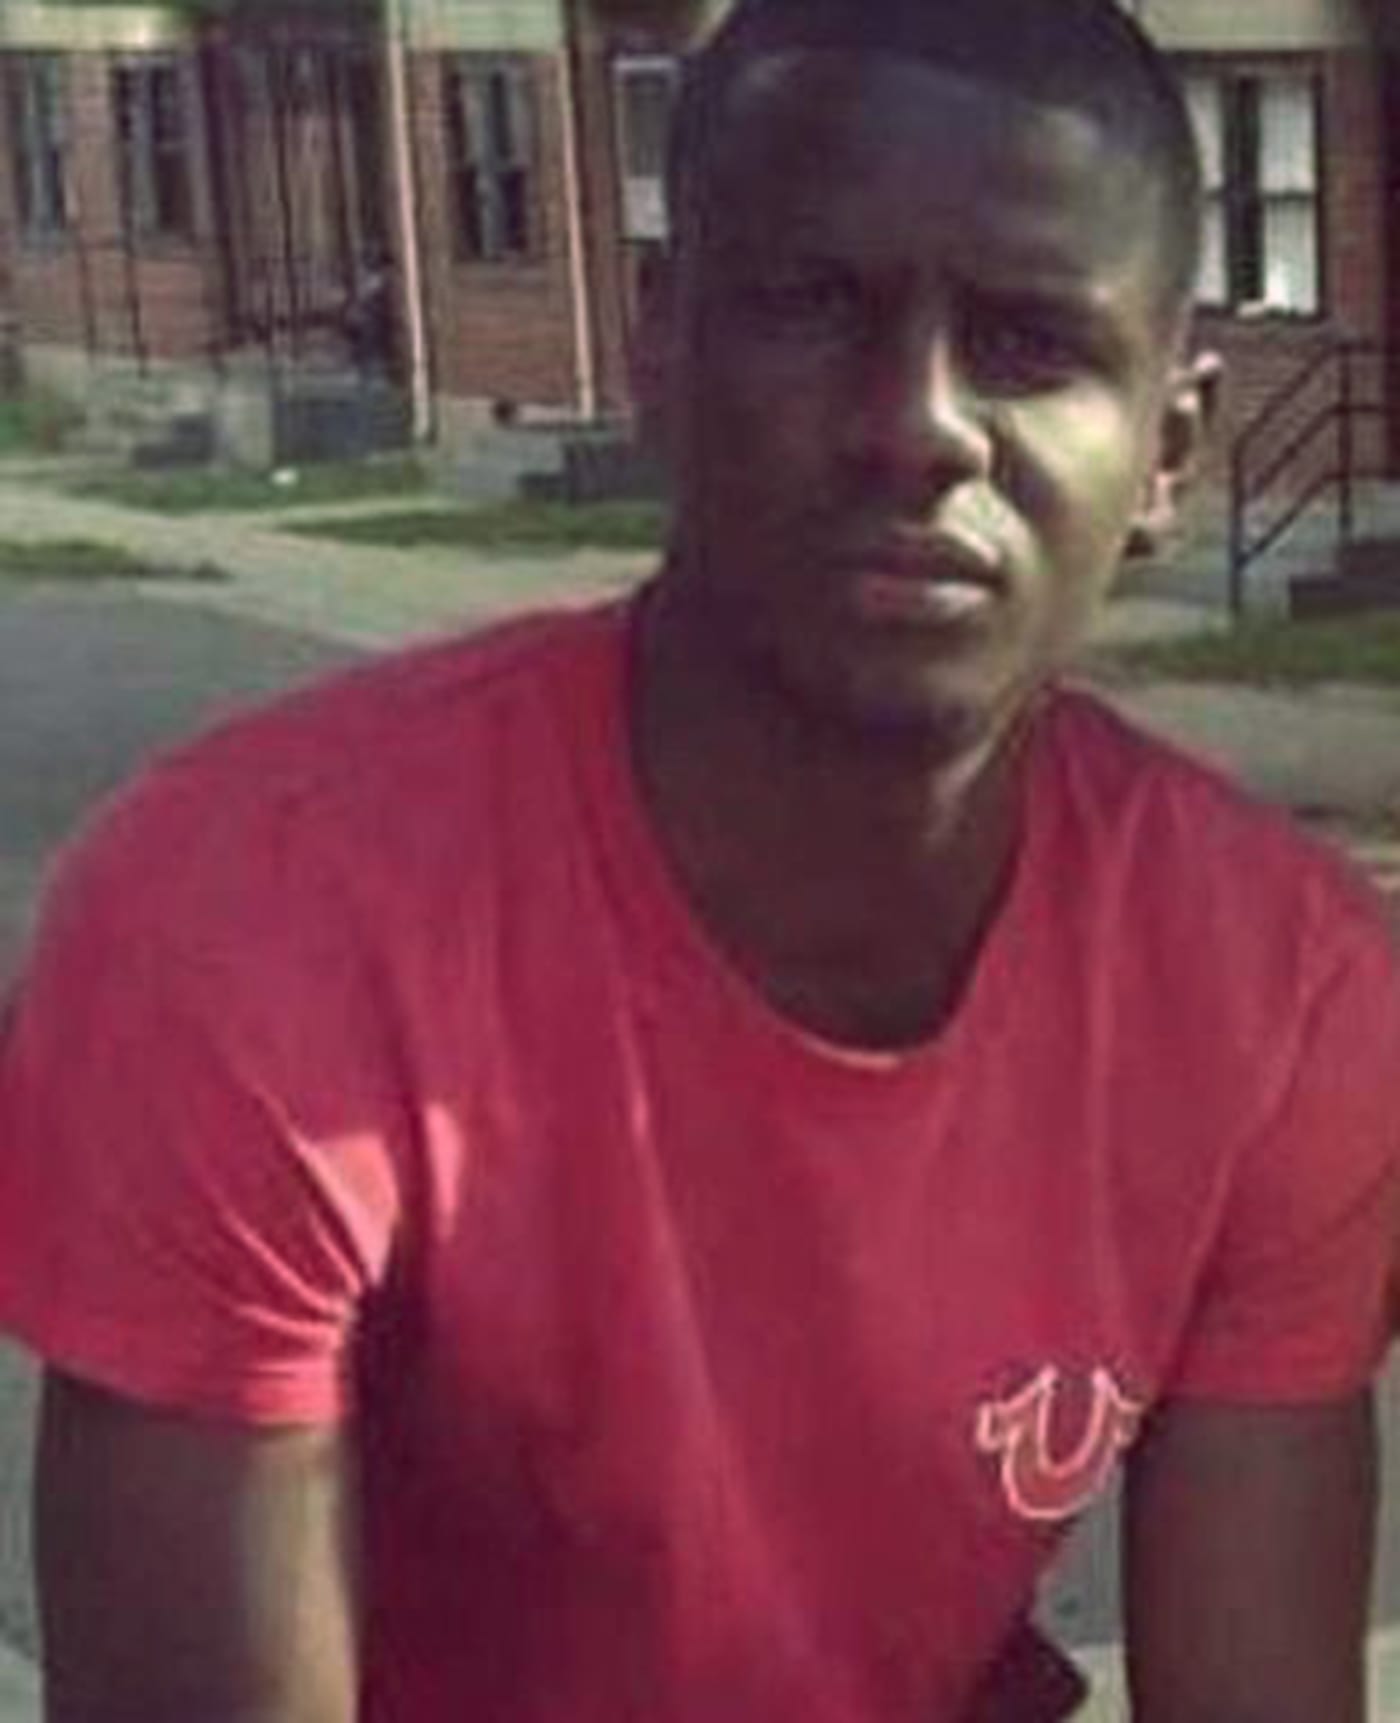 Freddie Gray Should Have Received Medical Care Before Ride in Van: Police - NBC News